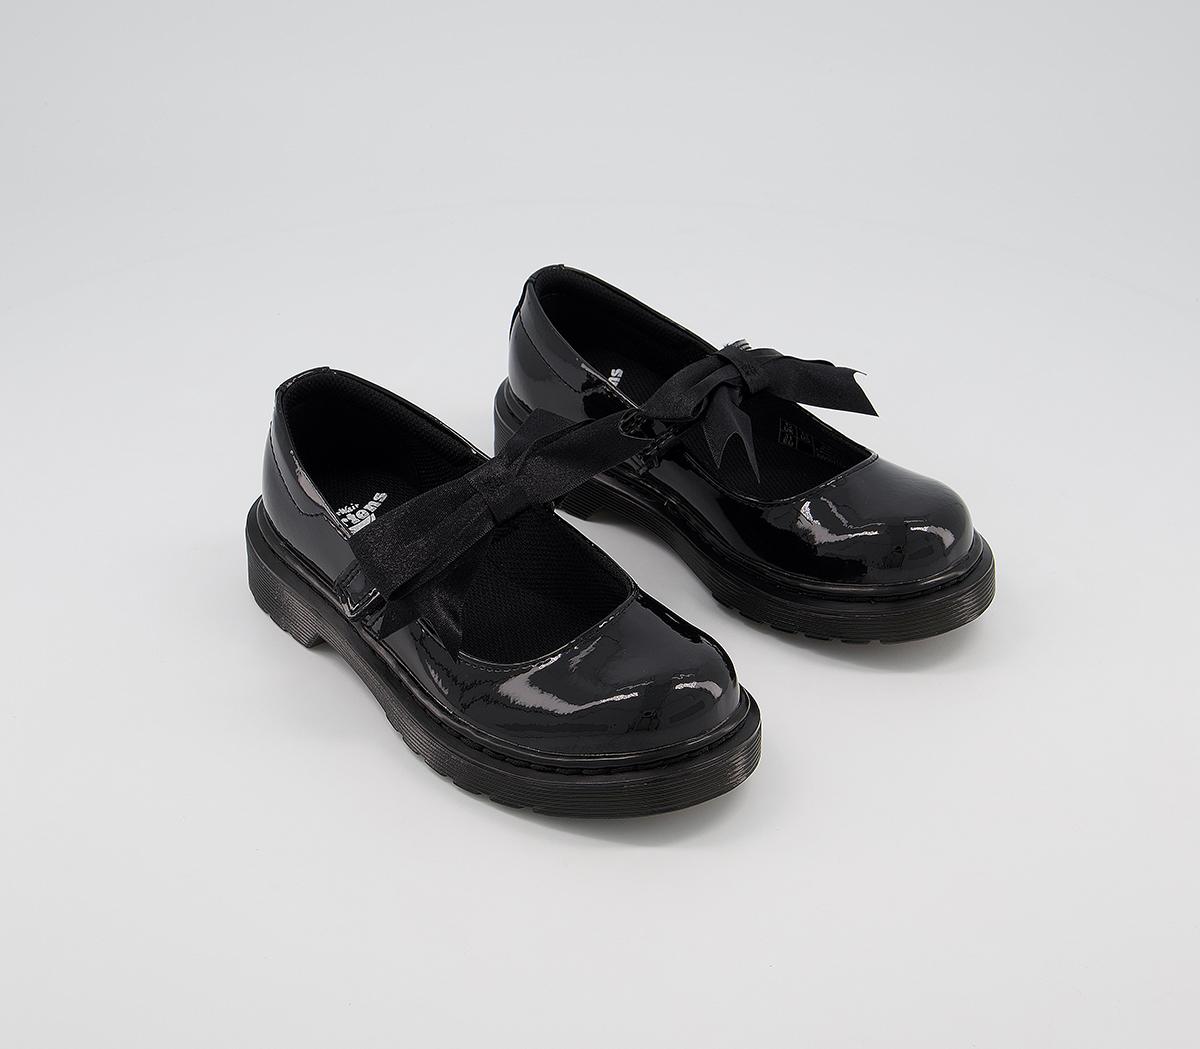 Dr. Martens Maccy Ii Bow Mary Jane Jnr Shoes Black Patent Leather - Unisex